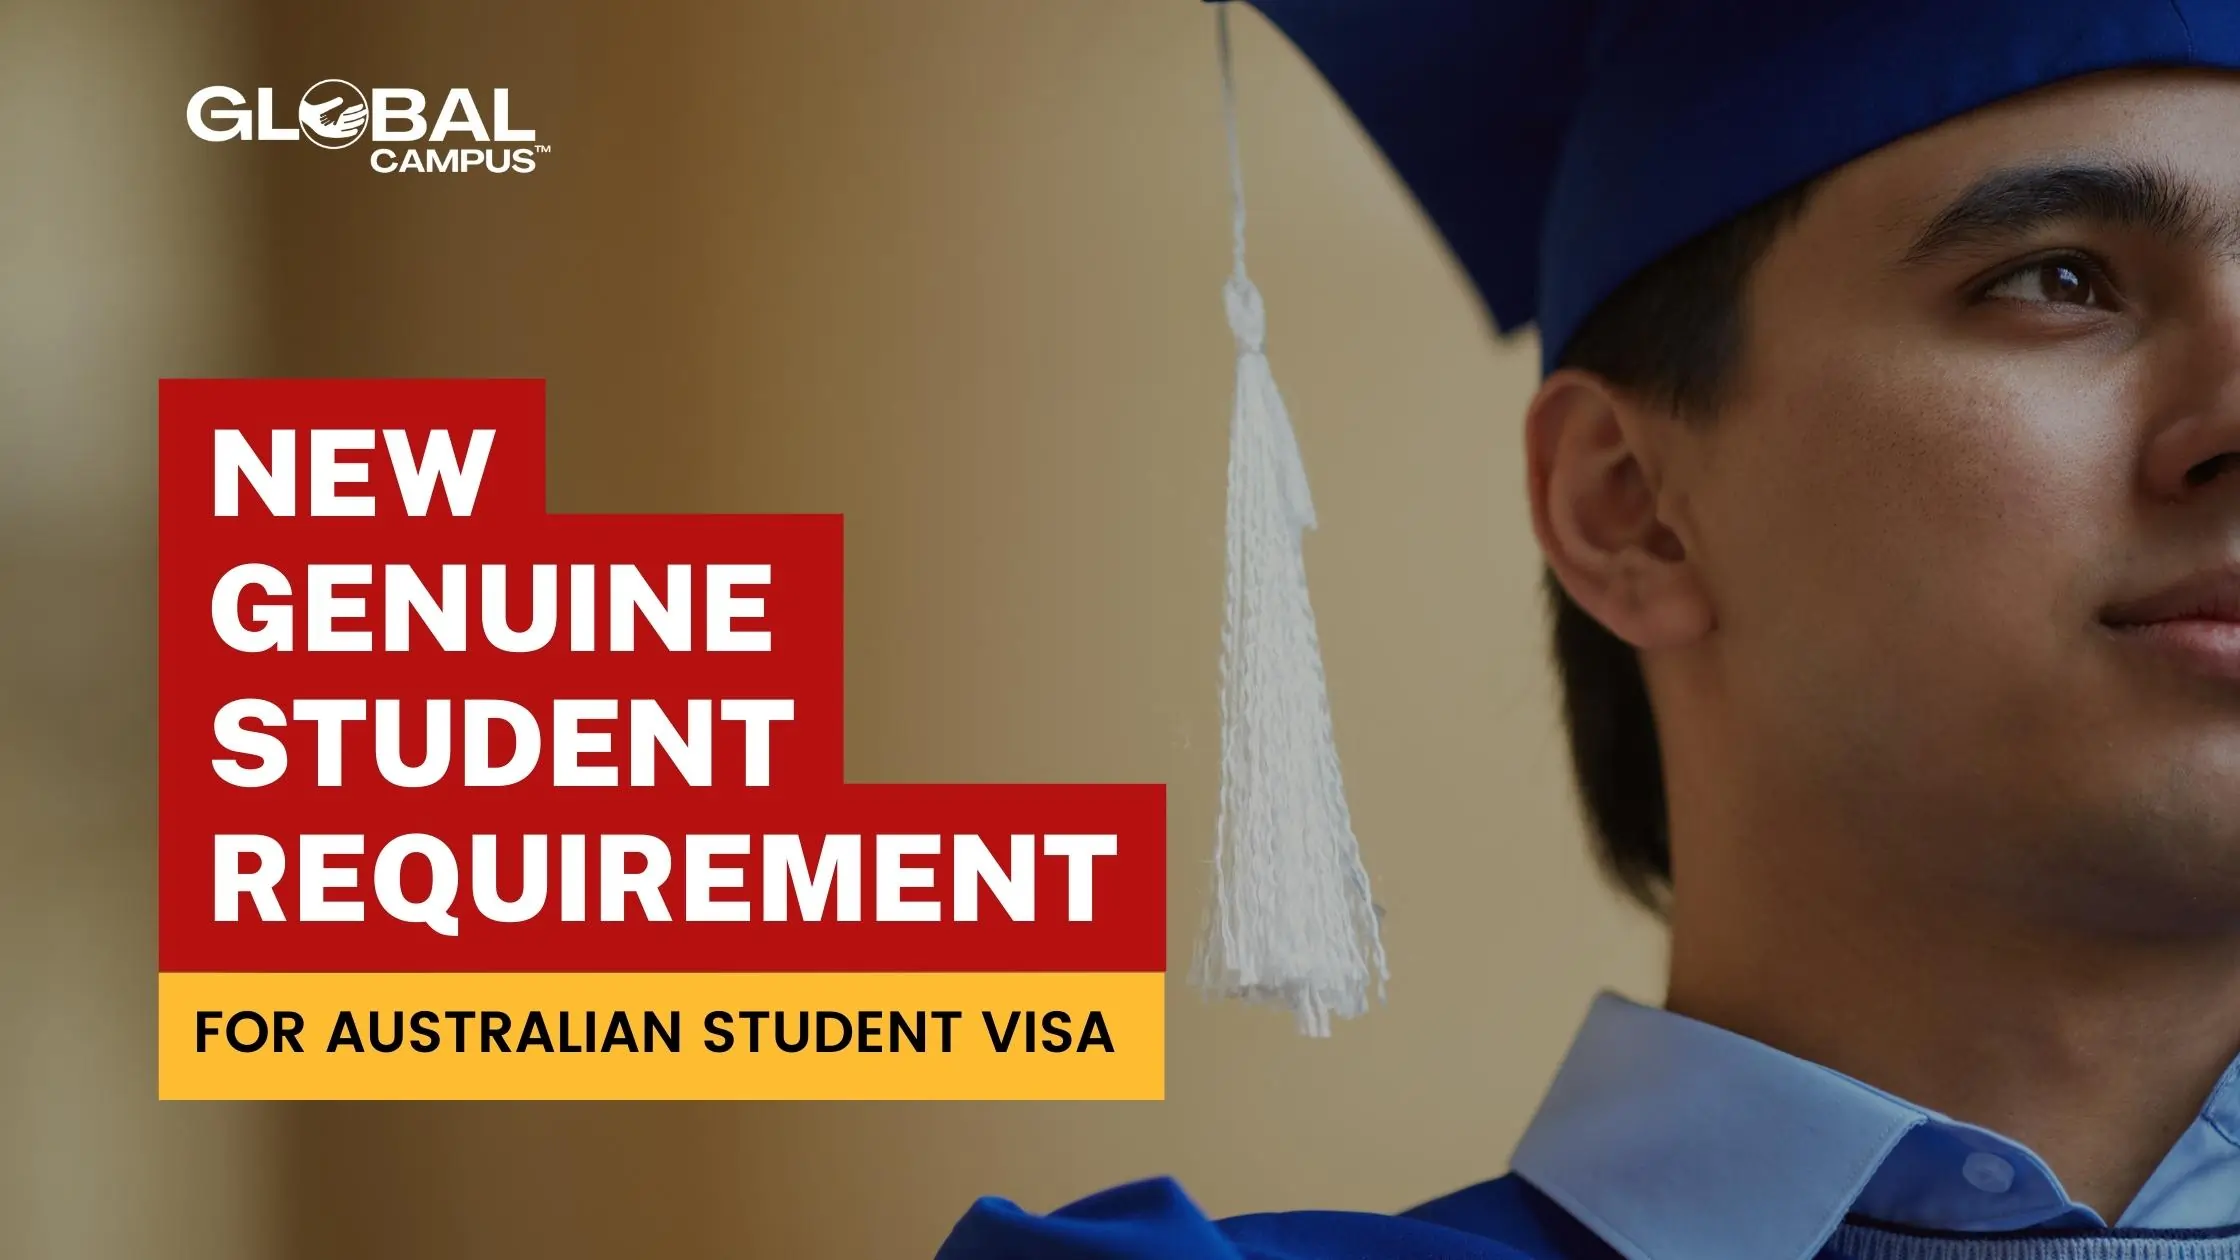 A boy in a blue graduation robe showing Genuine Student Requirement for Australian Student Visa.